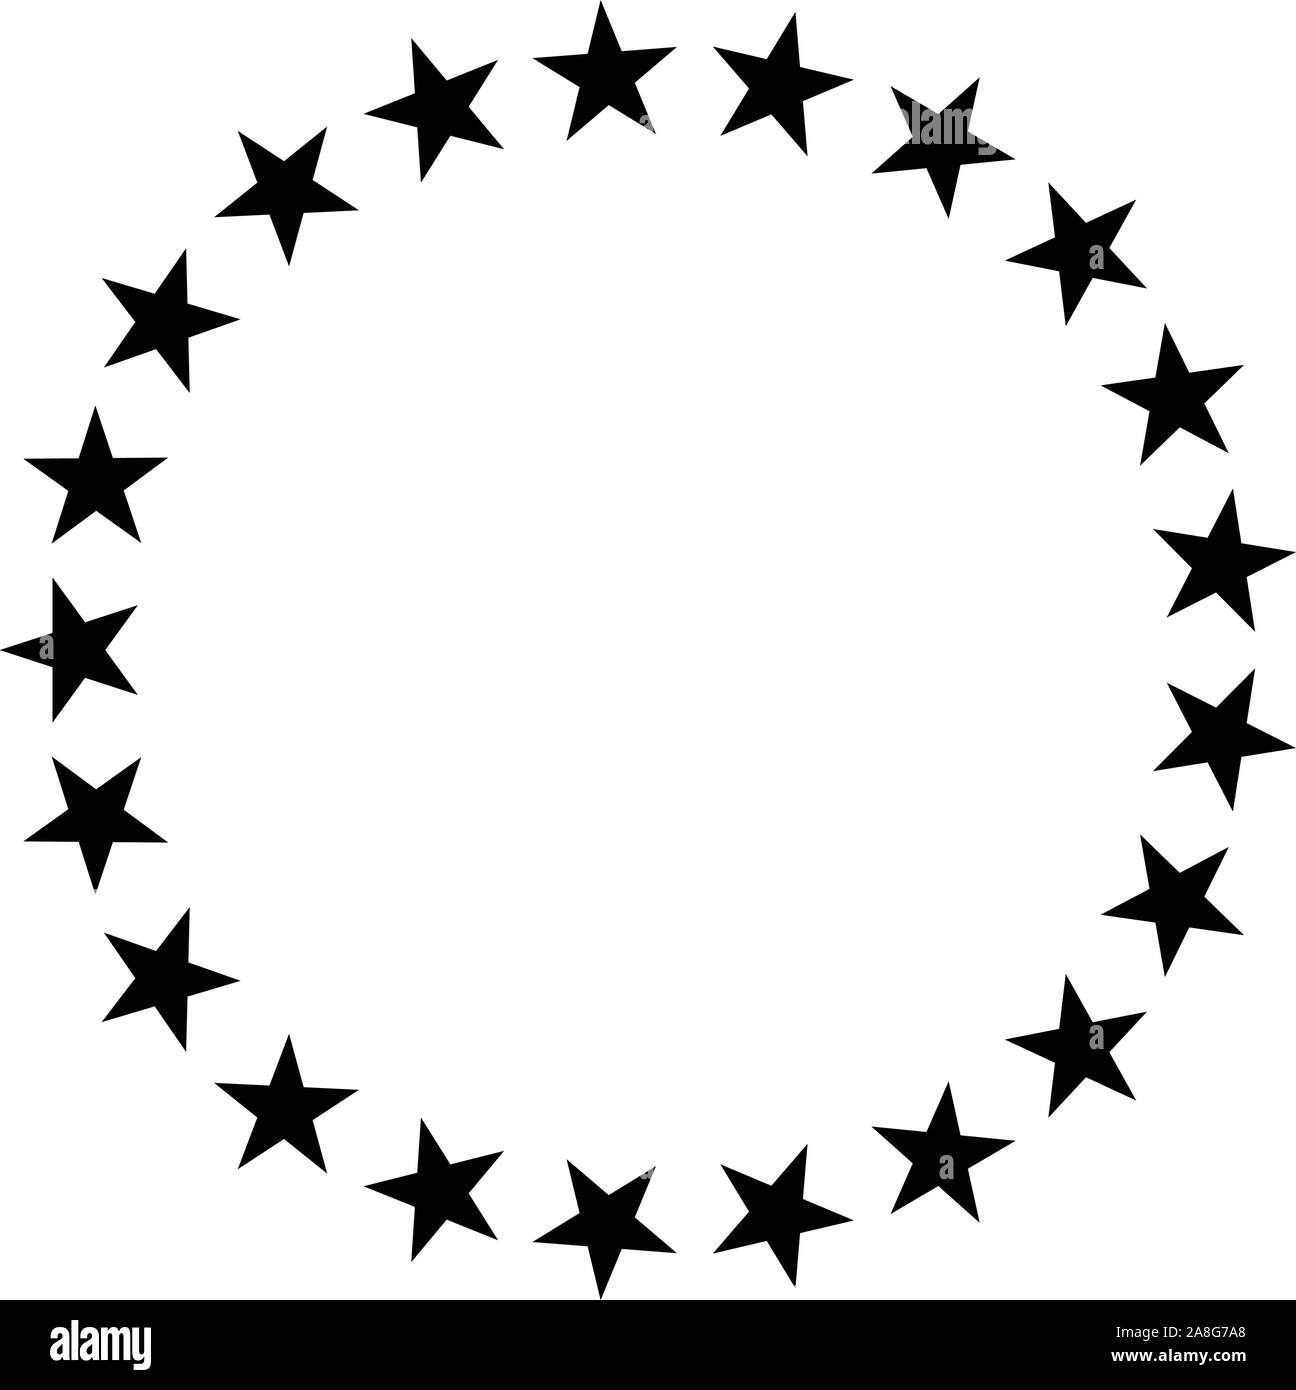 stars in circle icon on white background. stars in circle design for diagram, infographics, chart, presentation, app, UI. flat style. stars border fra Stock Vector